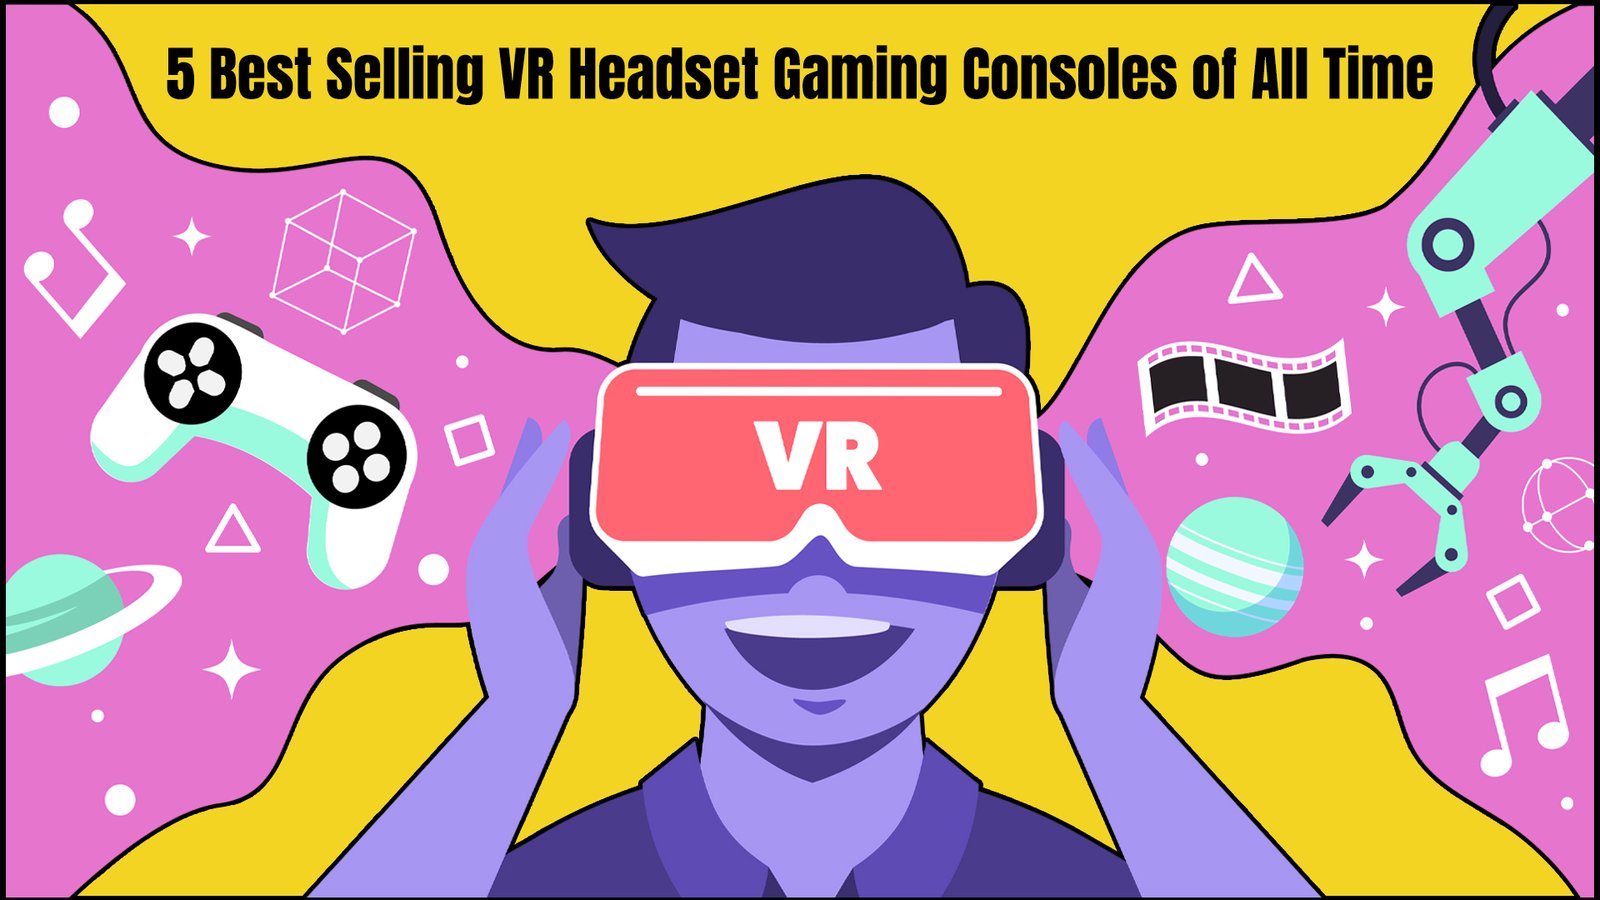 5 Best Selling VR Headset Gaming Consoles of All Time